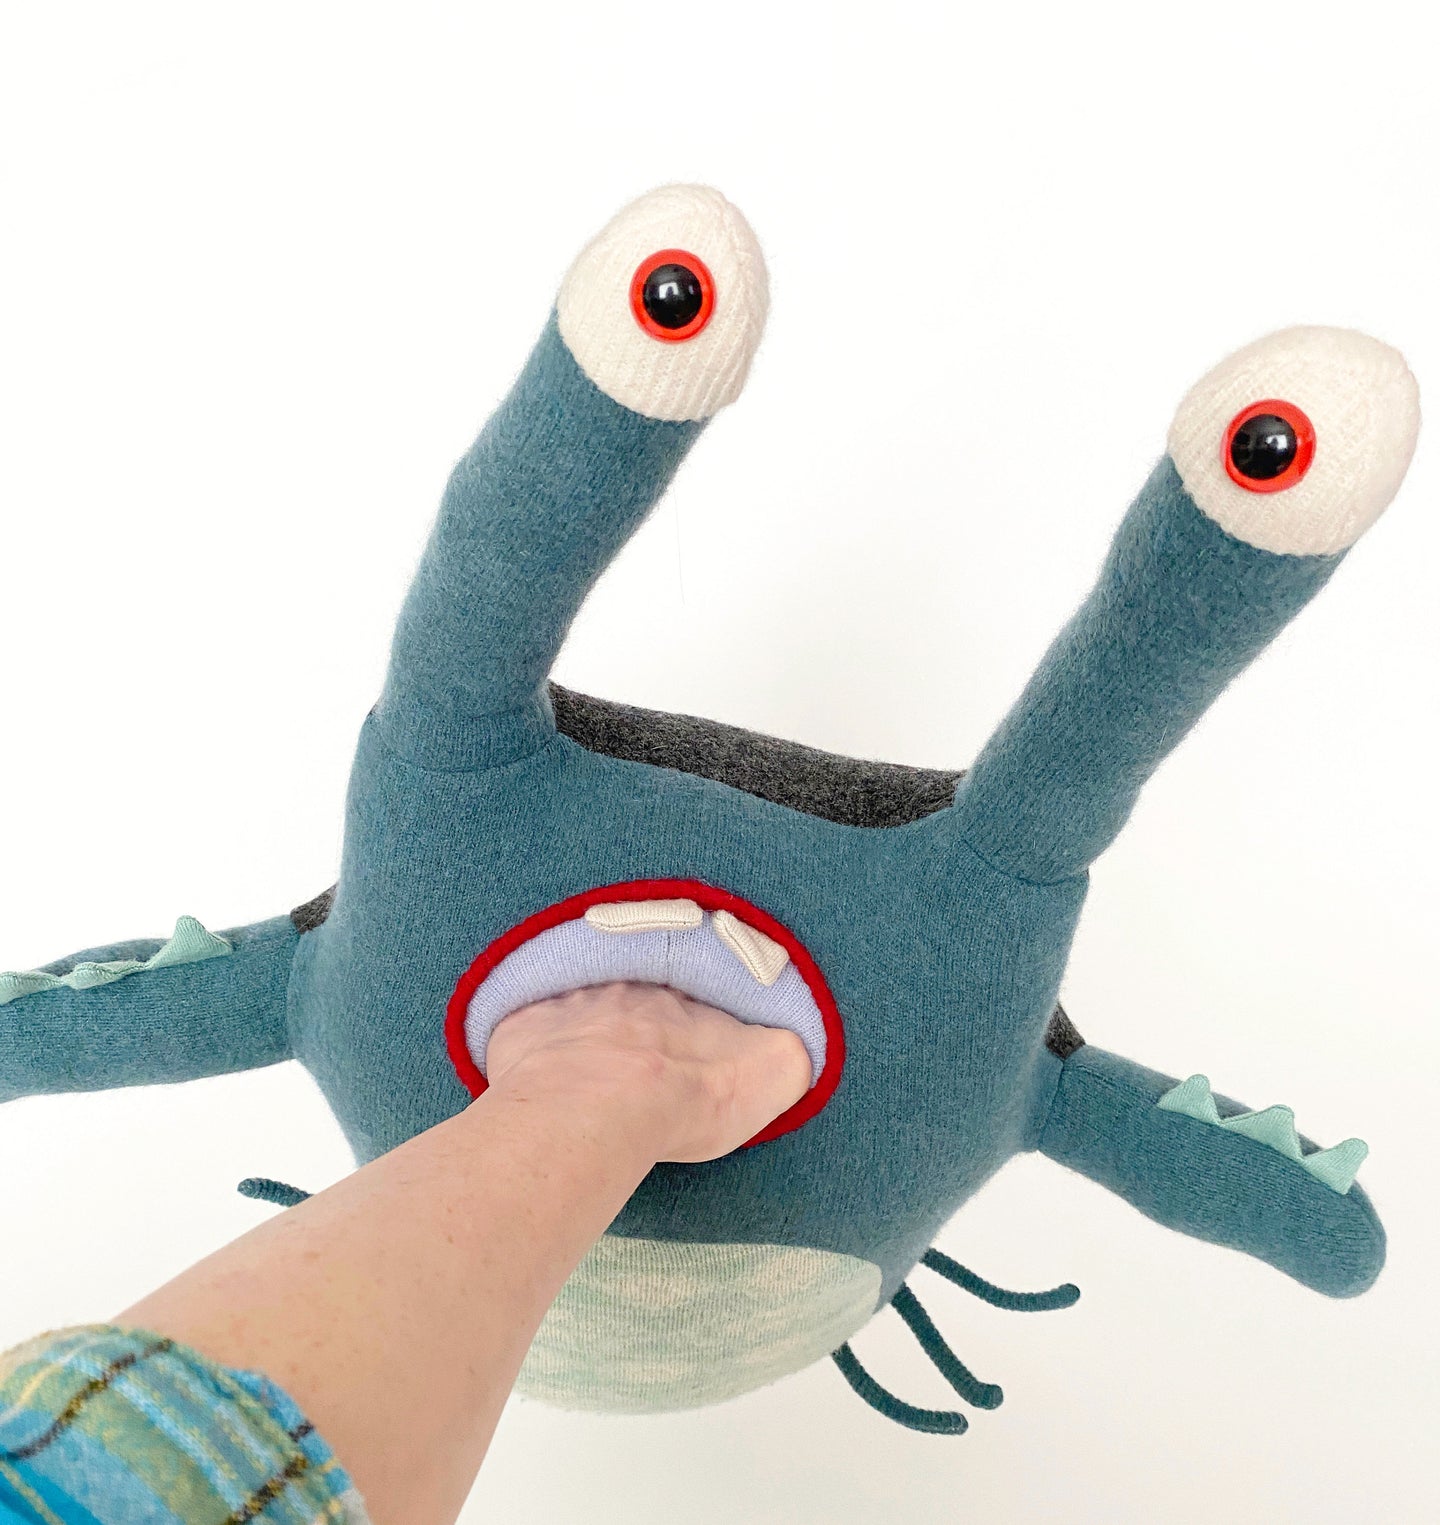 Thorne the friendly monster plush toy